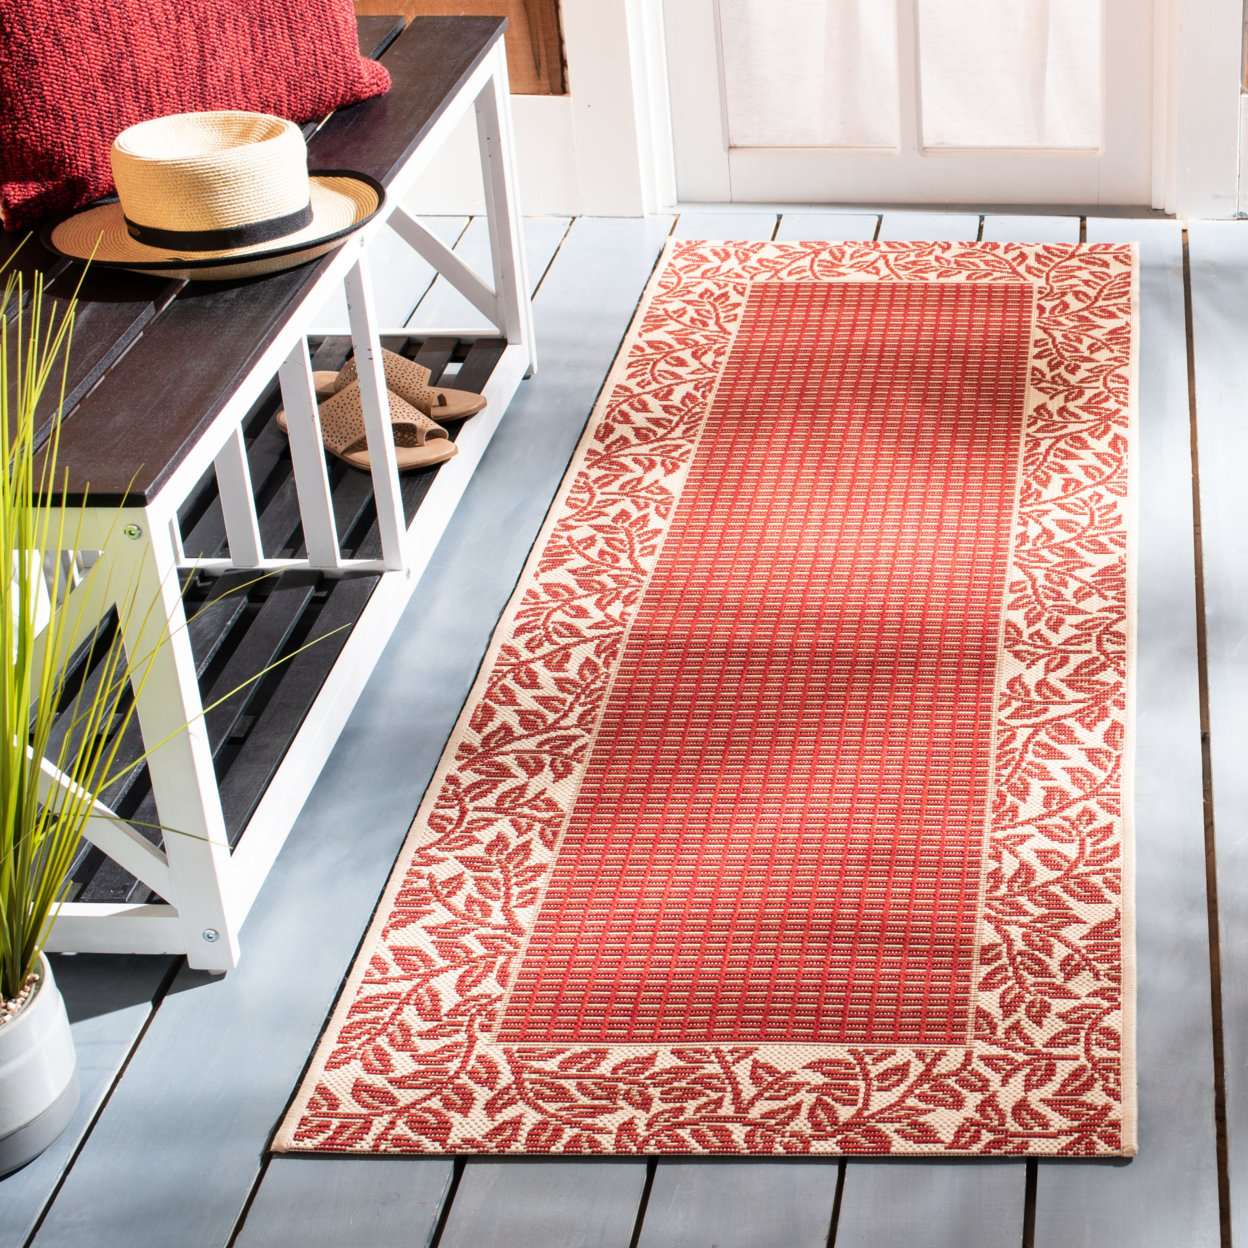 SAFAVIEH Courtyard CY0727-3707 Red / Natural Rug - 2' 7 X 5'